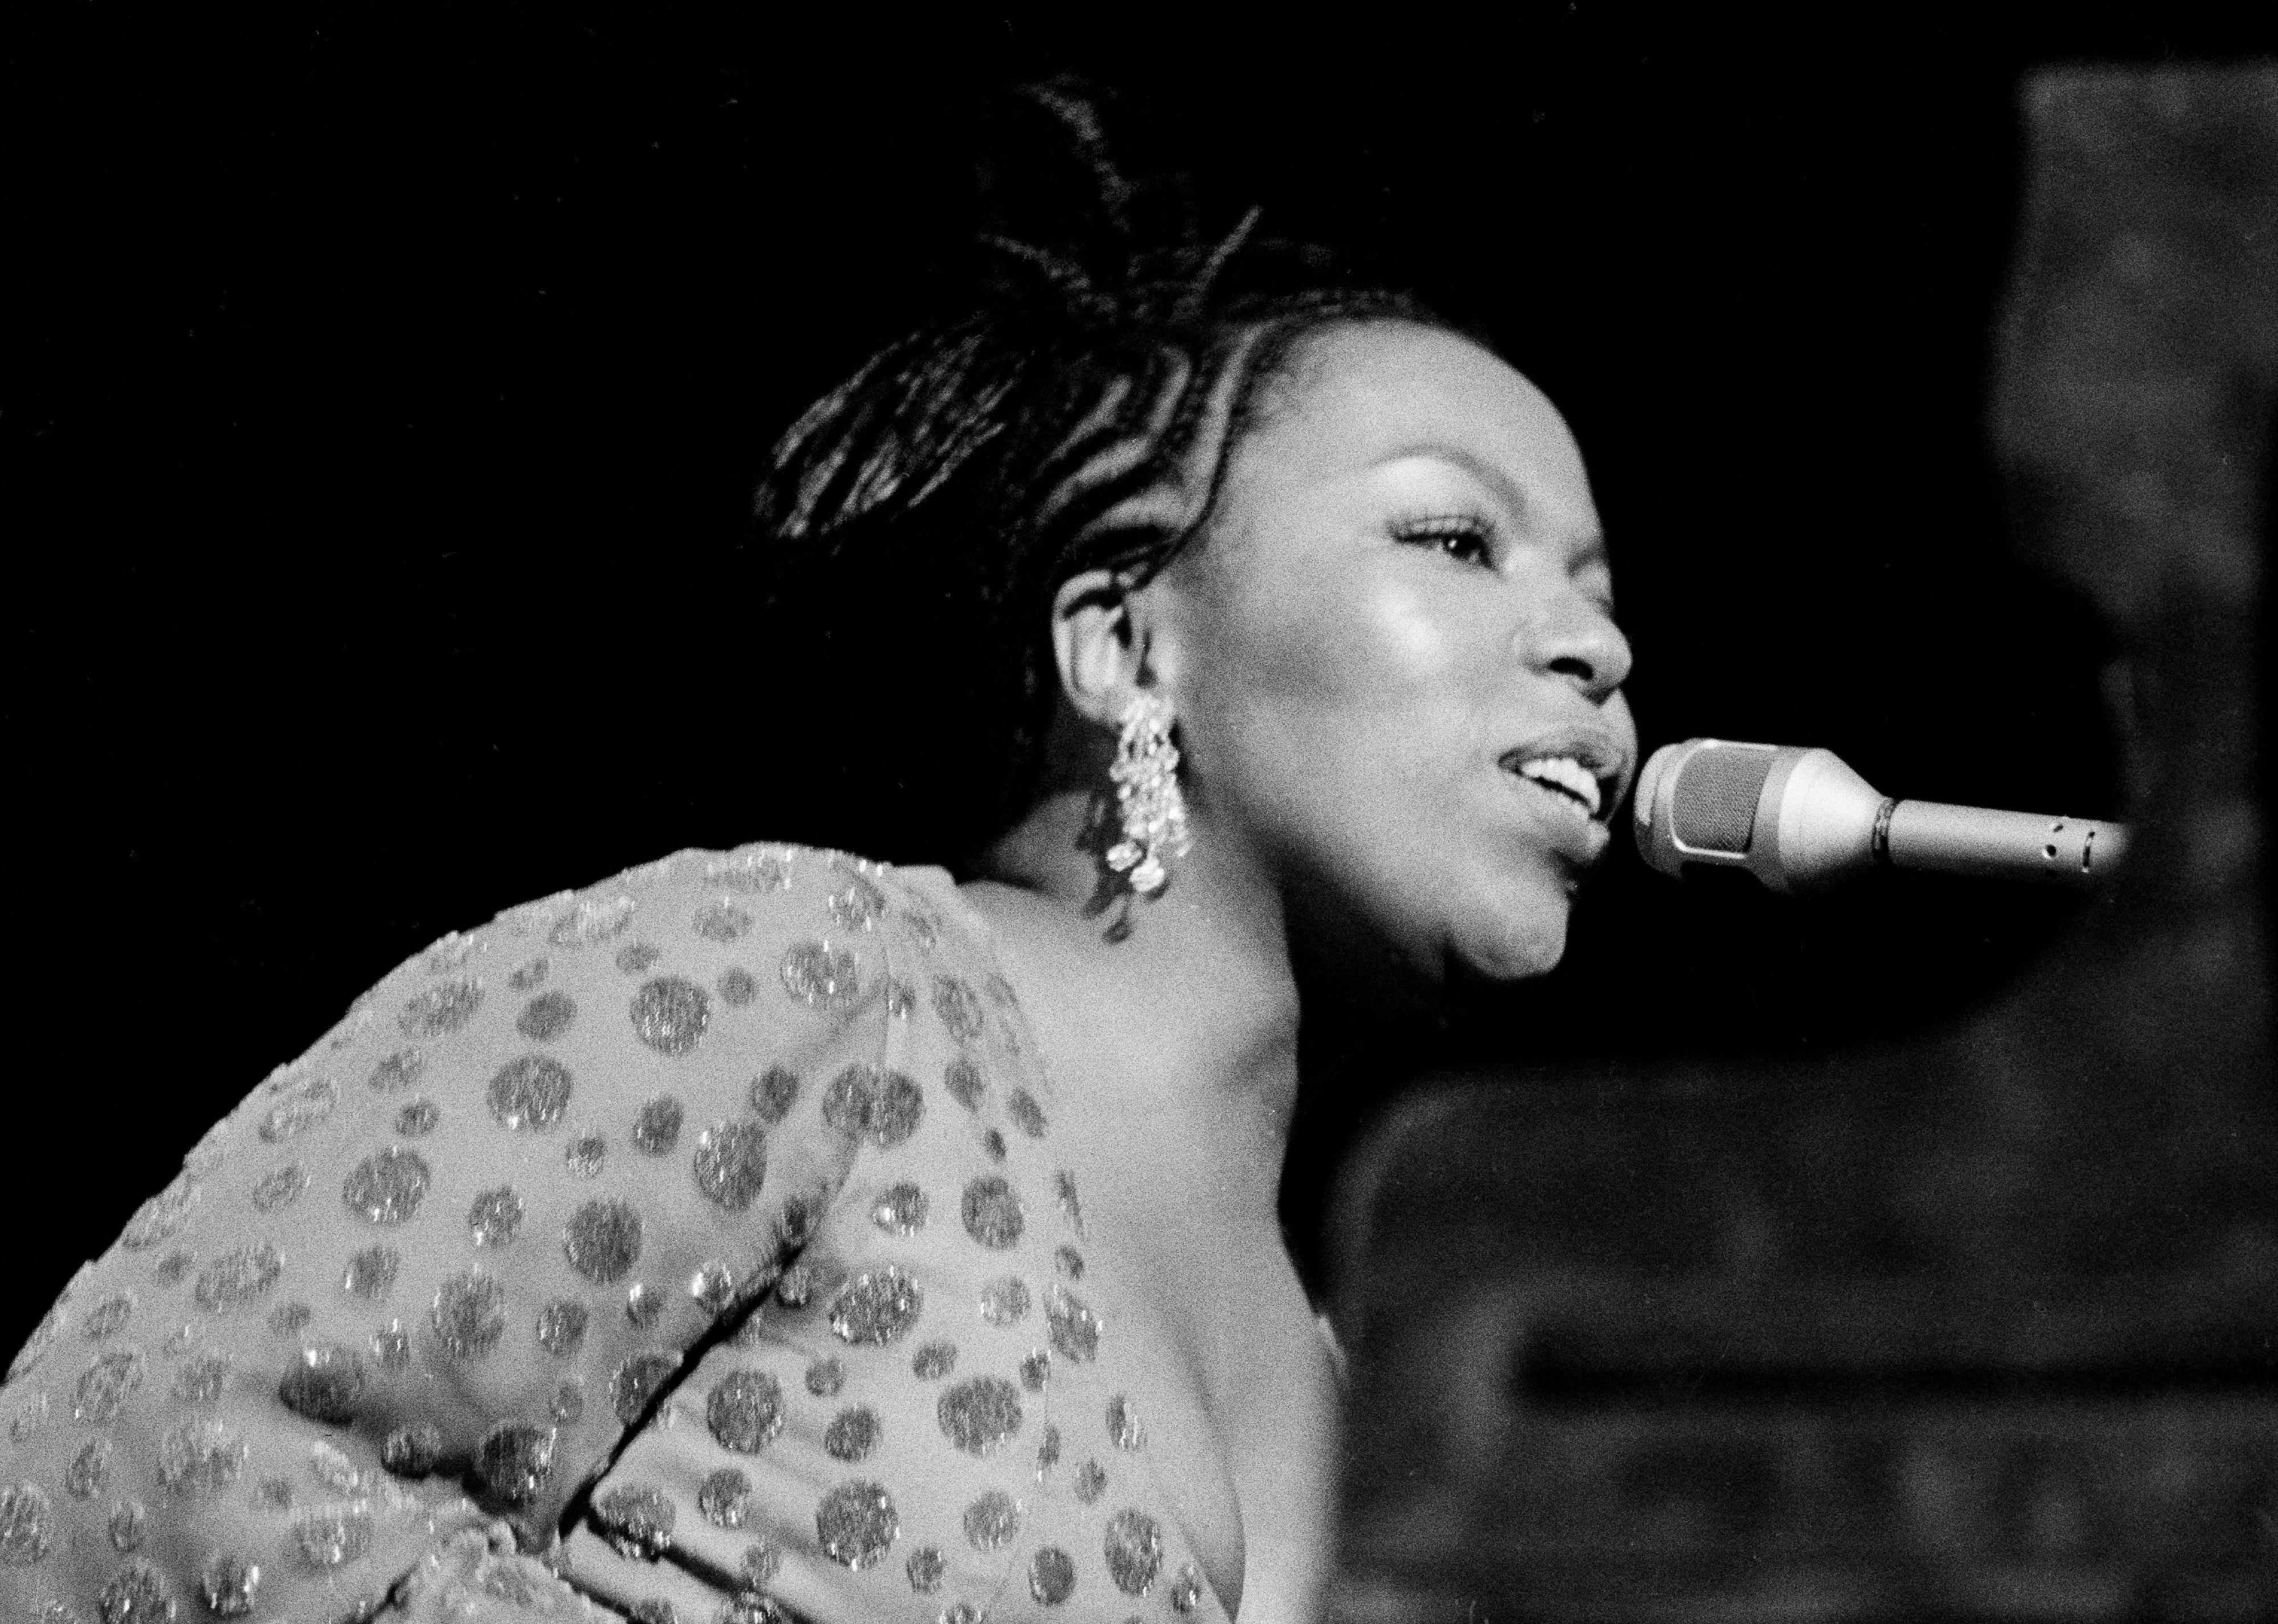 Roberta Flack performs on stage at Ronnie Scott